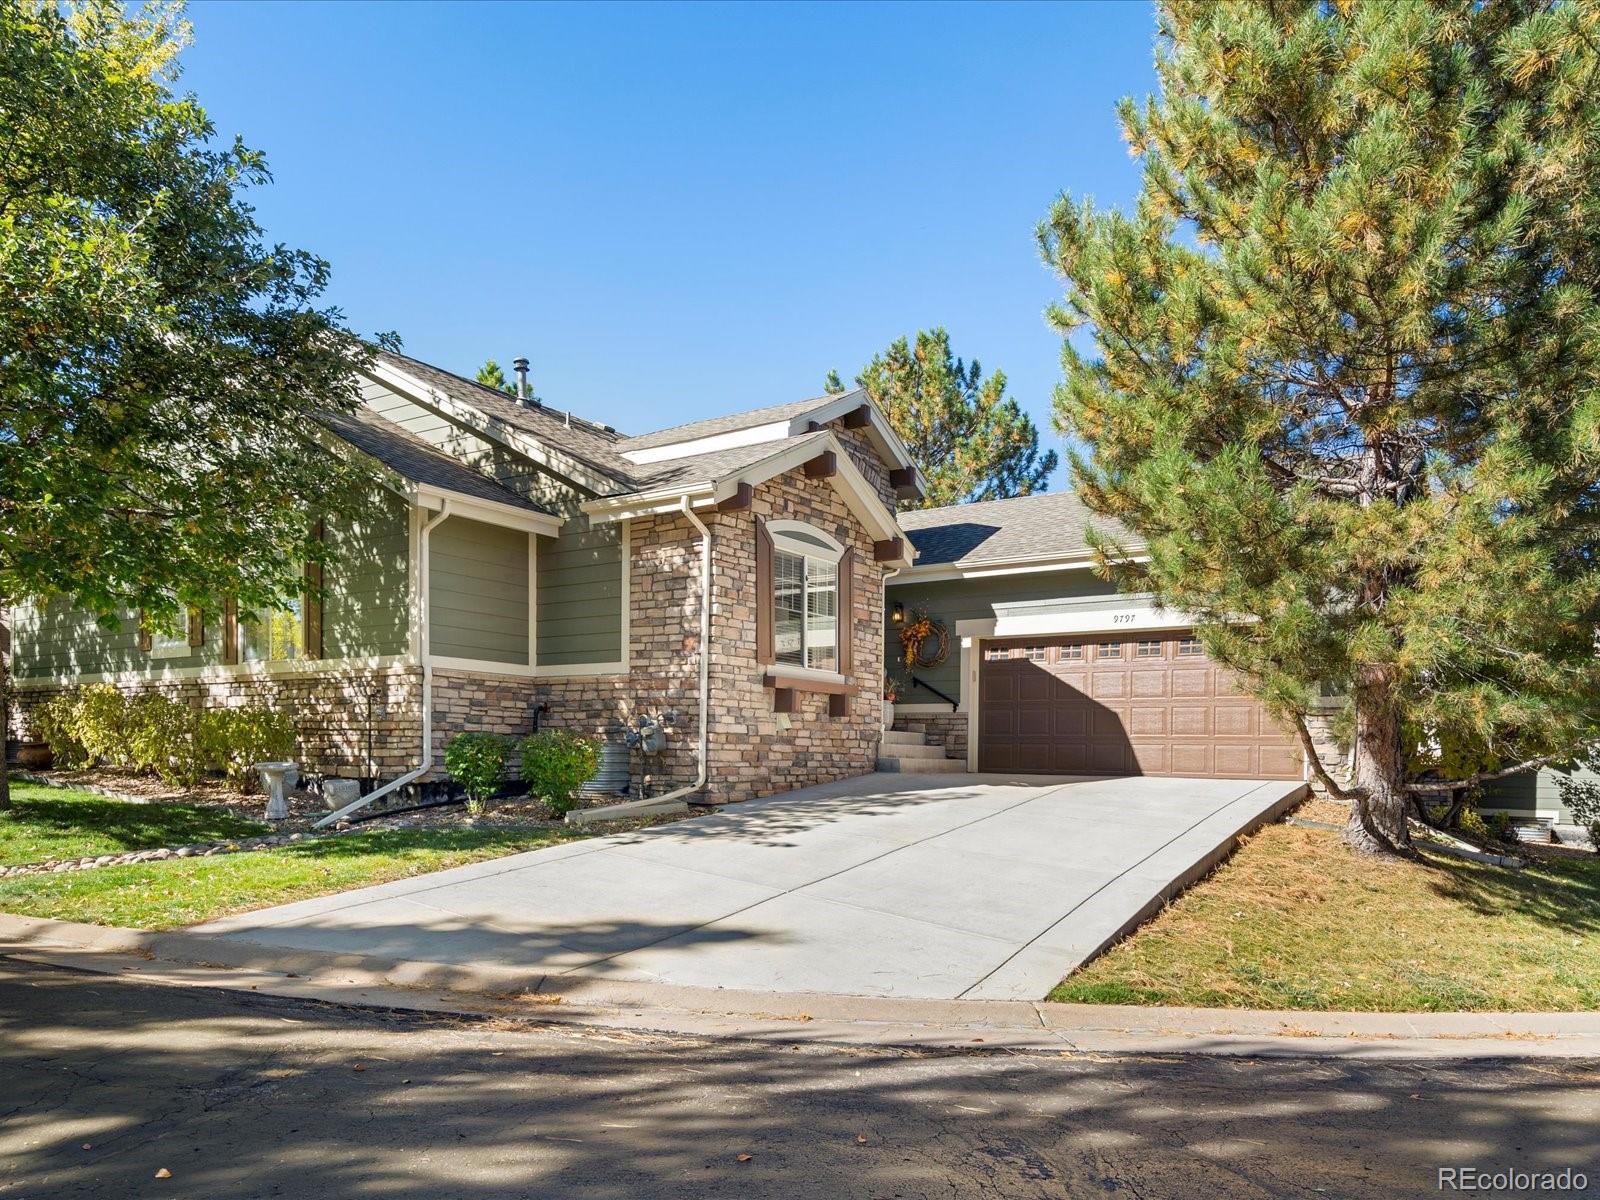 9797 s johnson court, Littleton sold home. Closed on 2023-12-18 for $766,500.